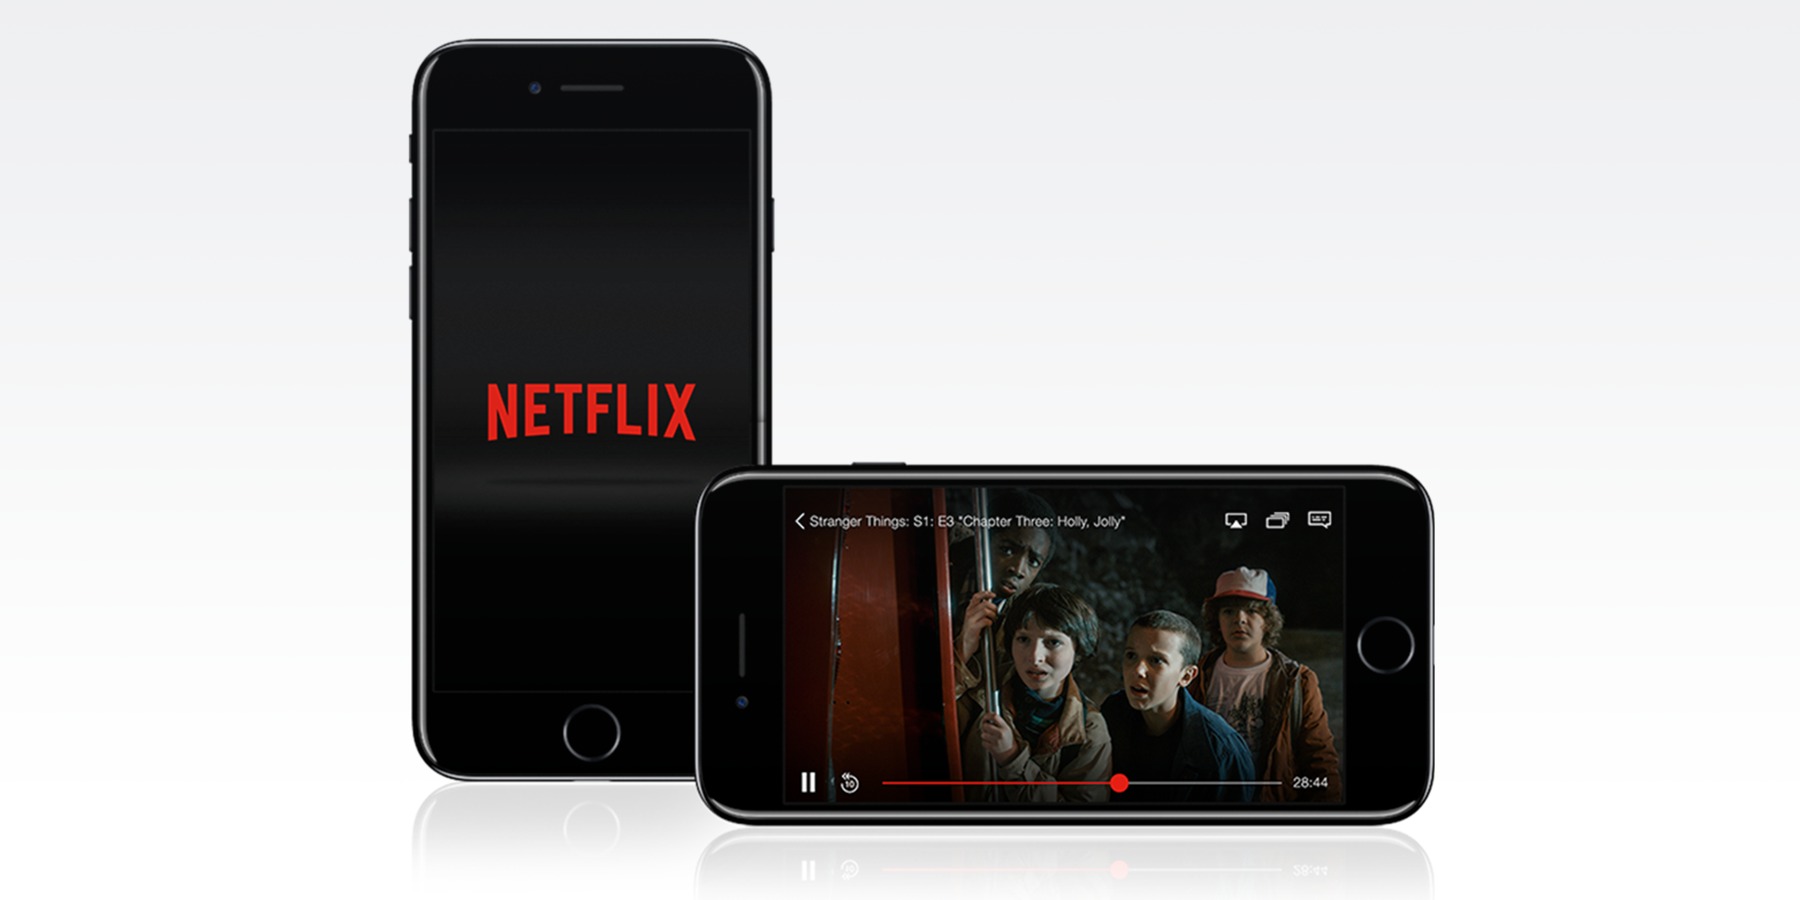 How To Watch Netflix Together On IPhone